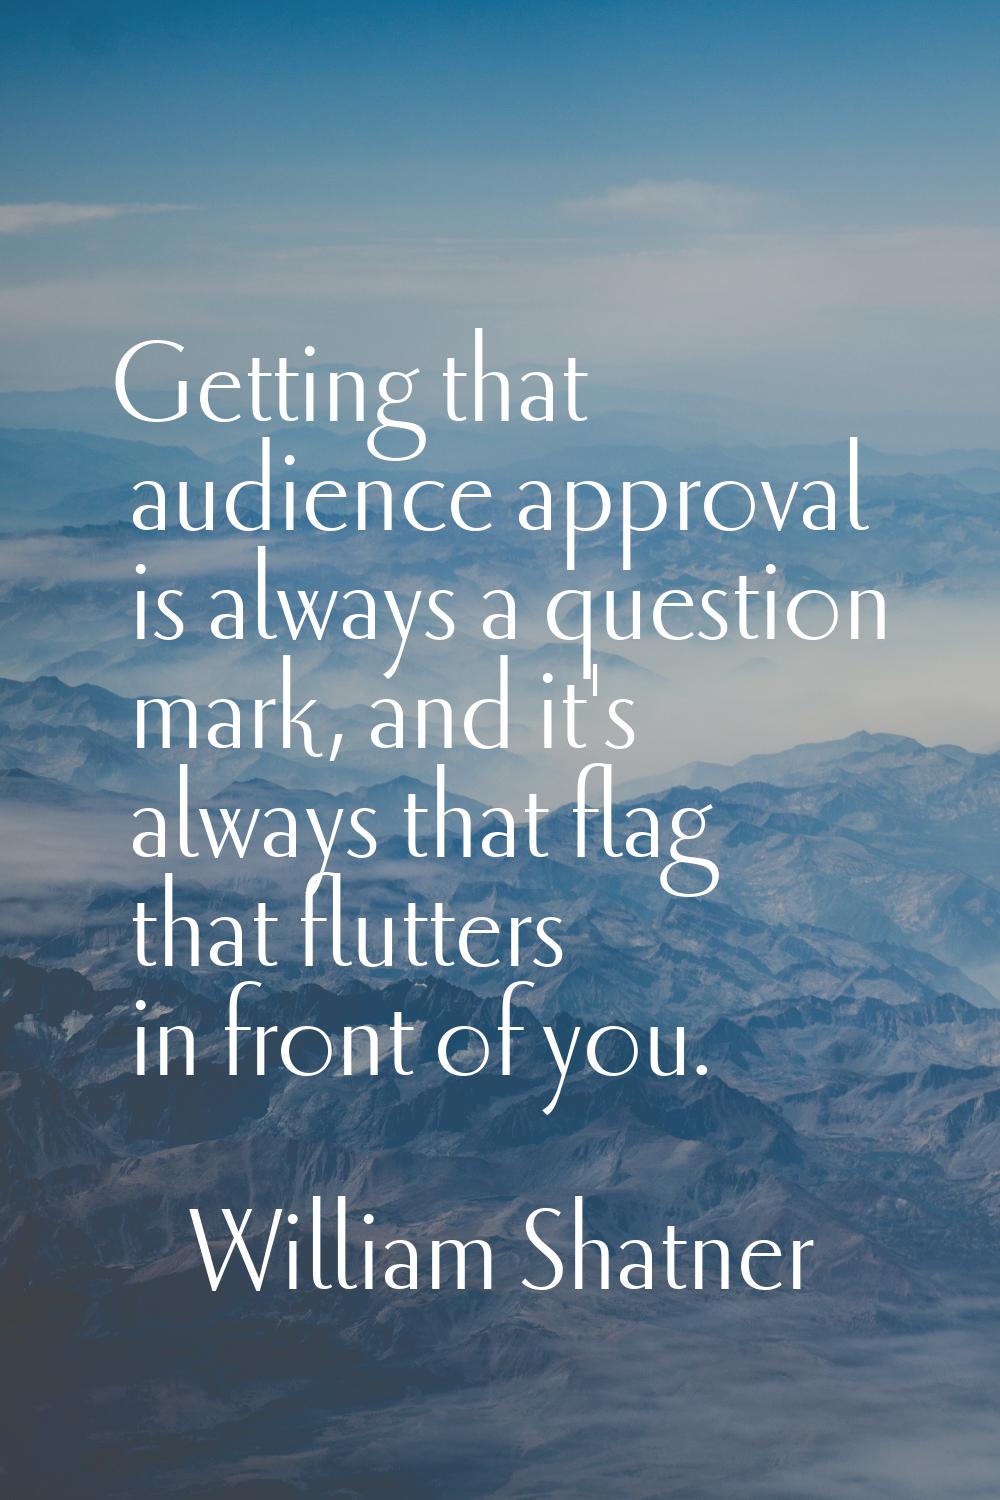 Getting that audience approval is always a question mark, and it's always that flag that flutters i